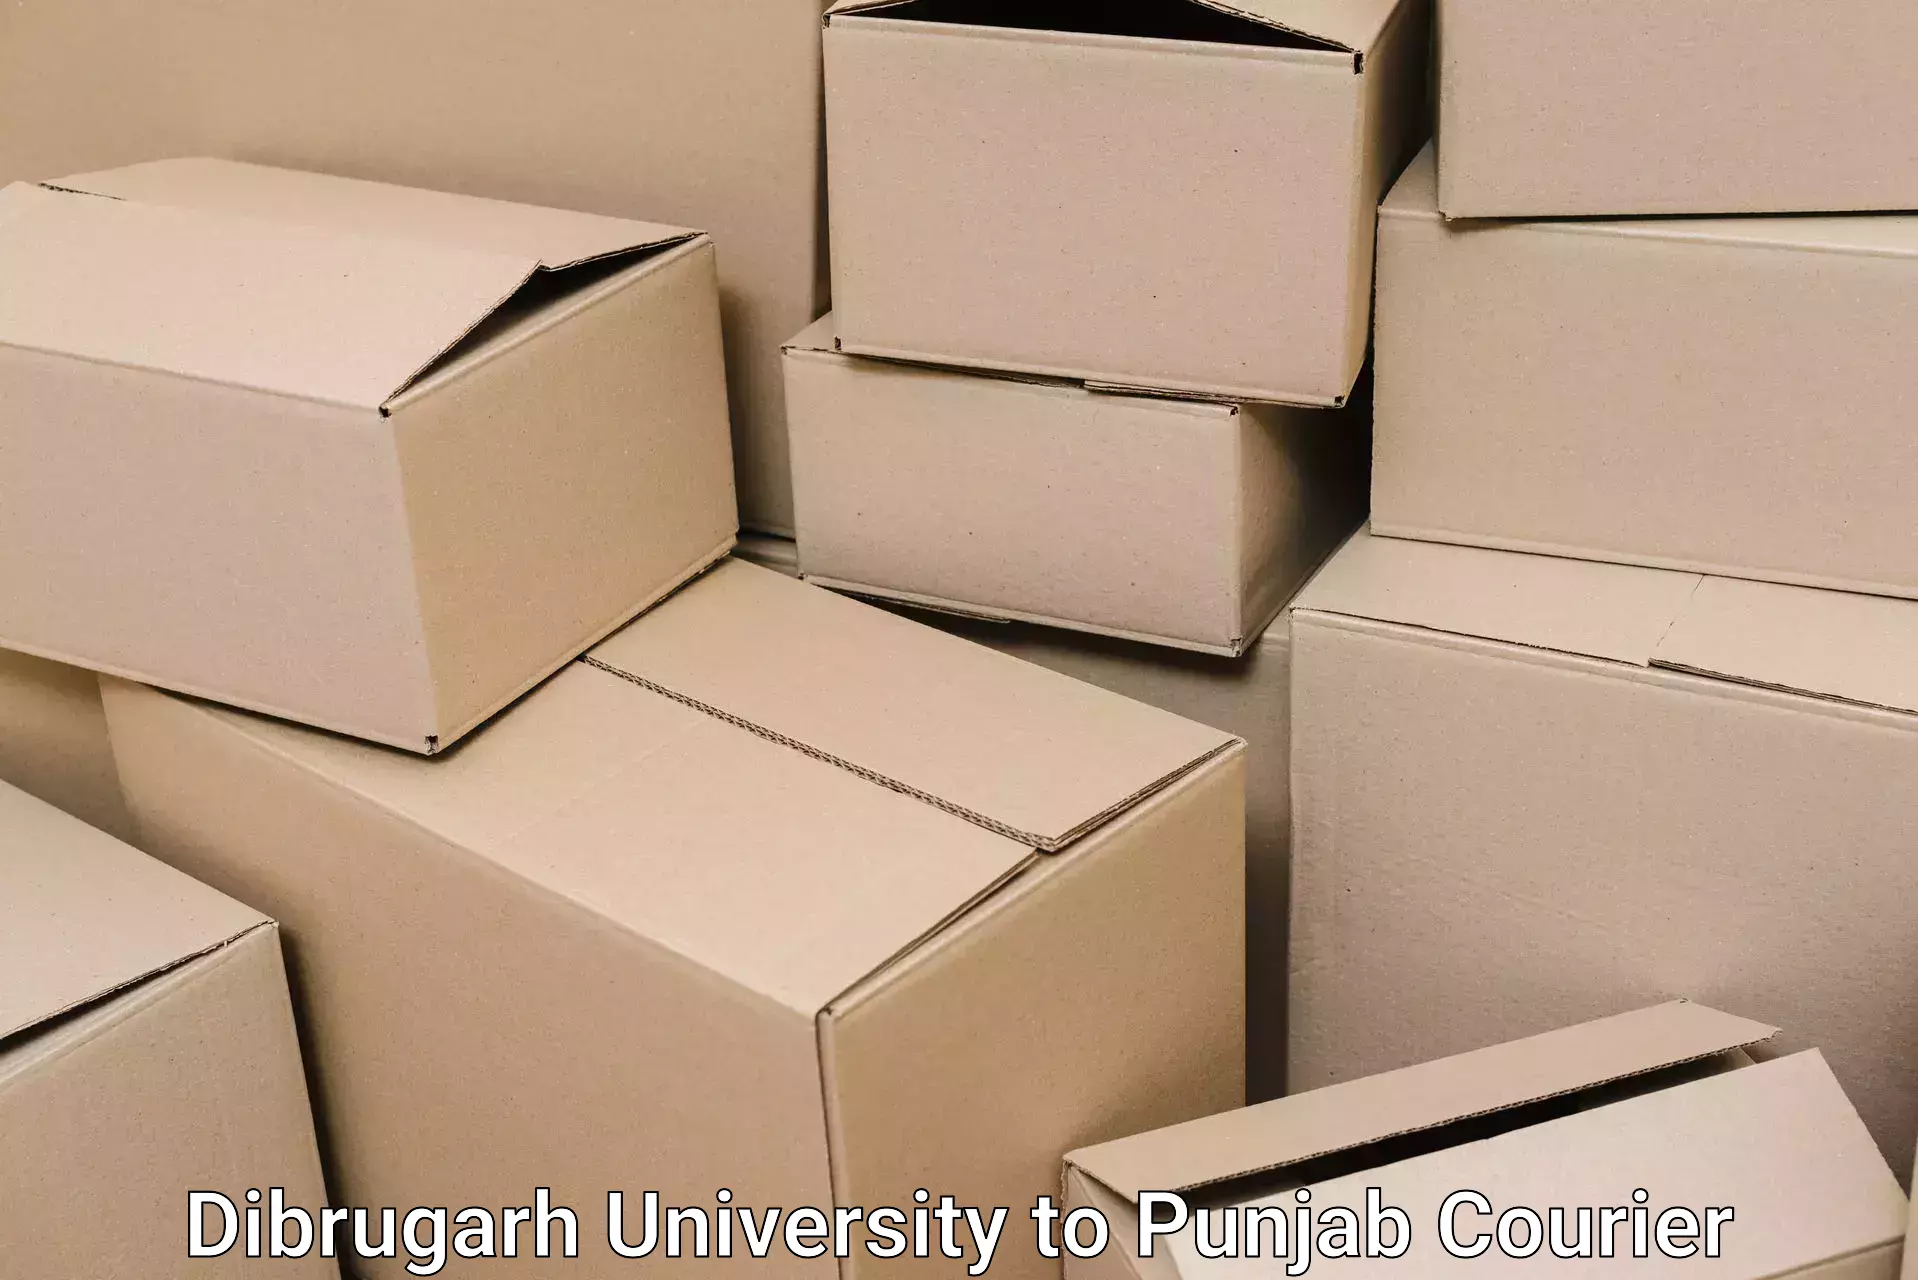 Moving service excellence Dibrugarh University to Mohali